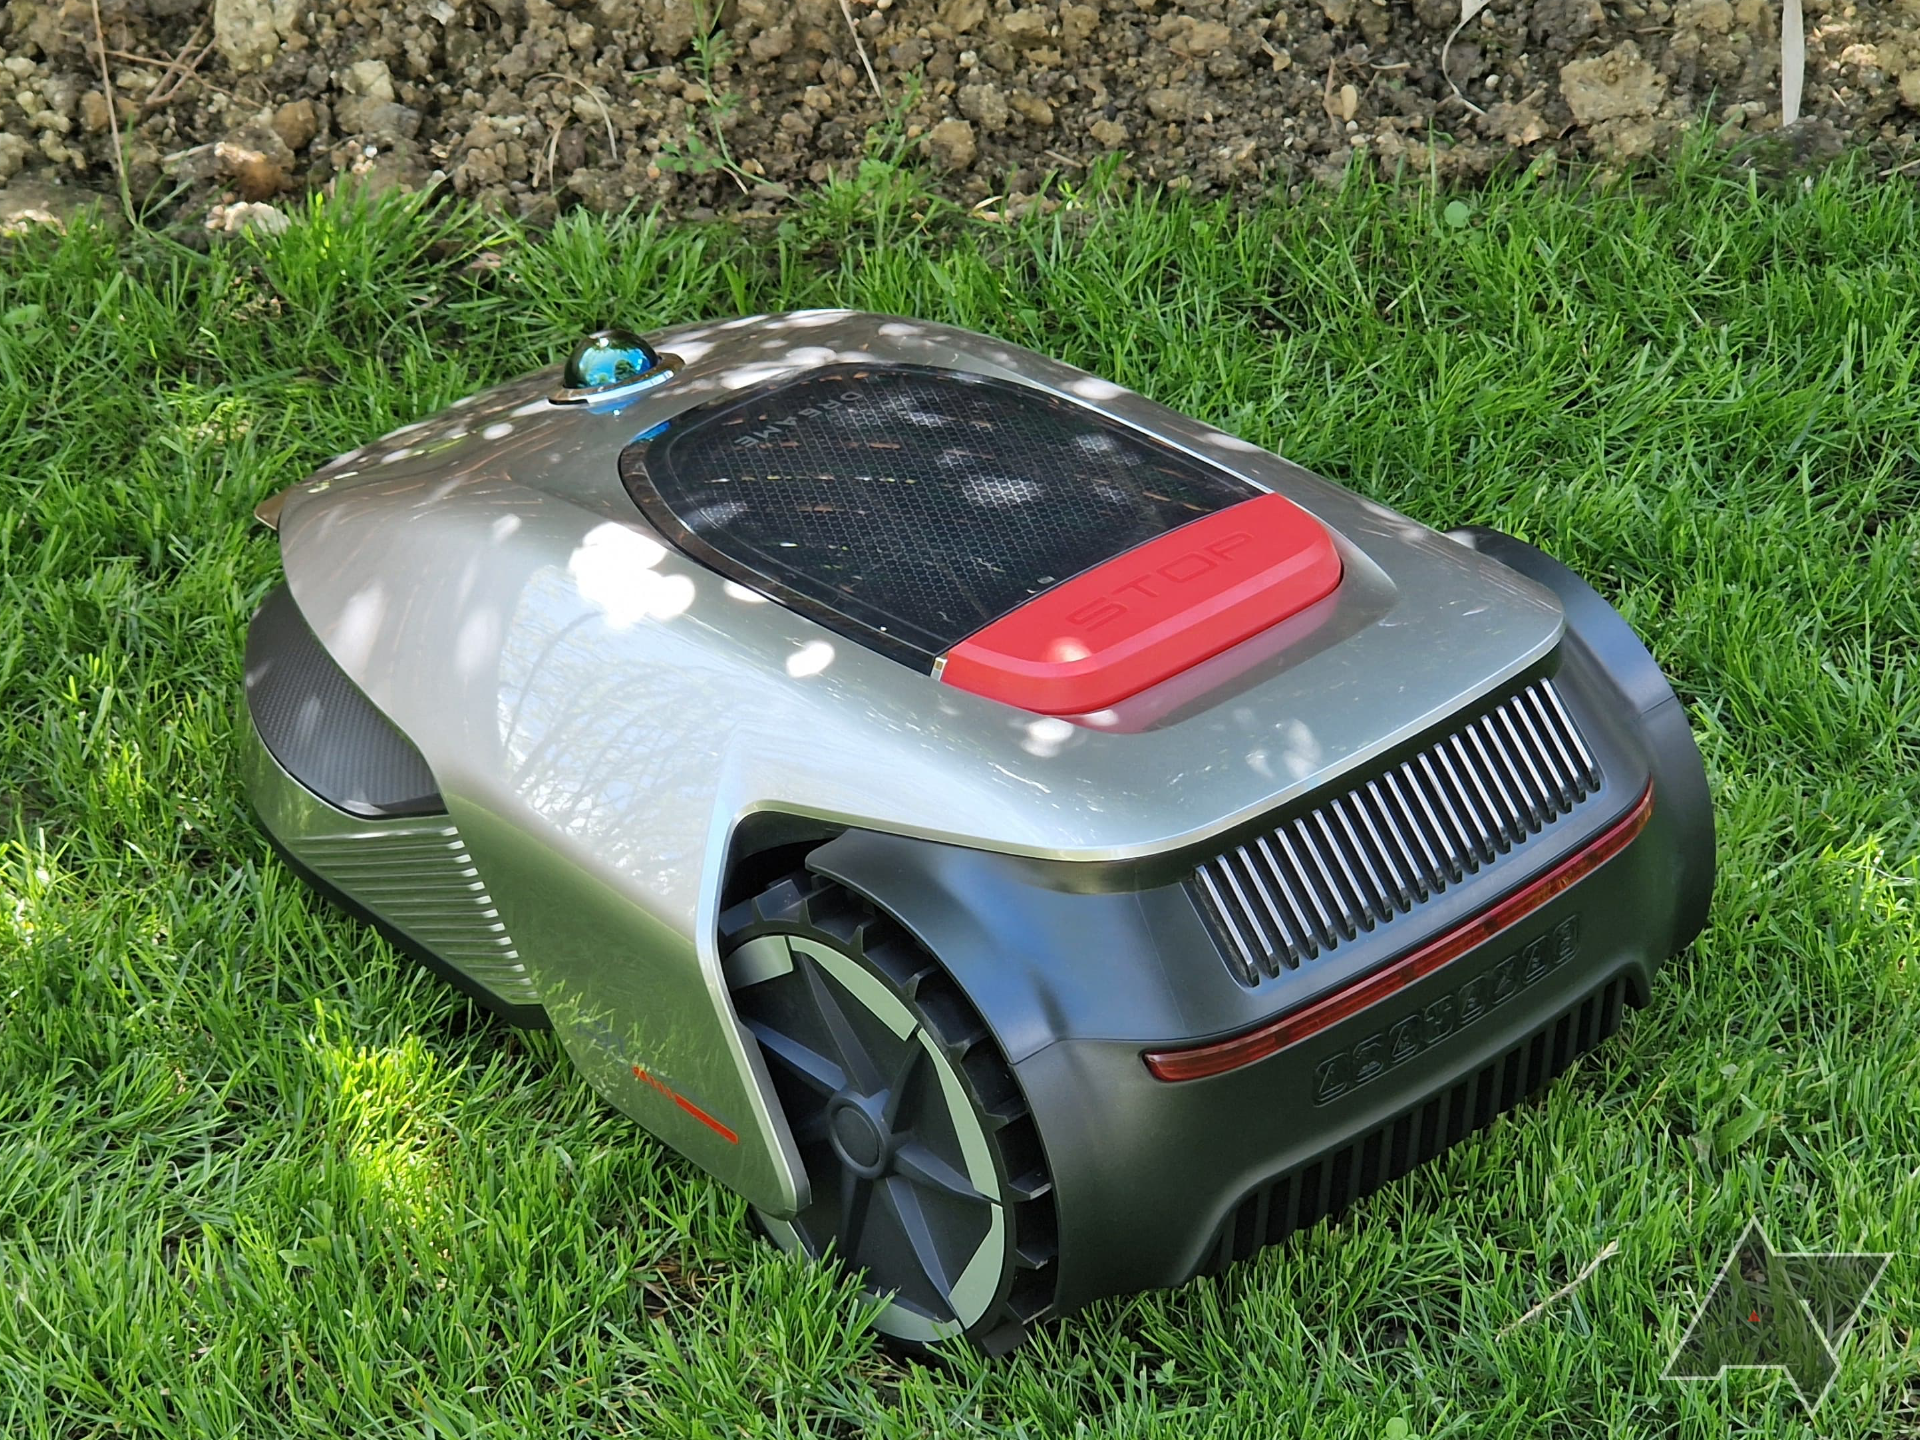 Rear view of the Dreametech Robotic Mower A1 on grass